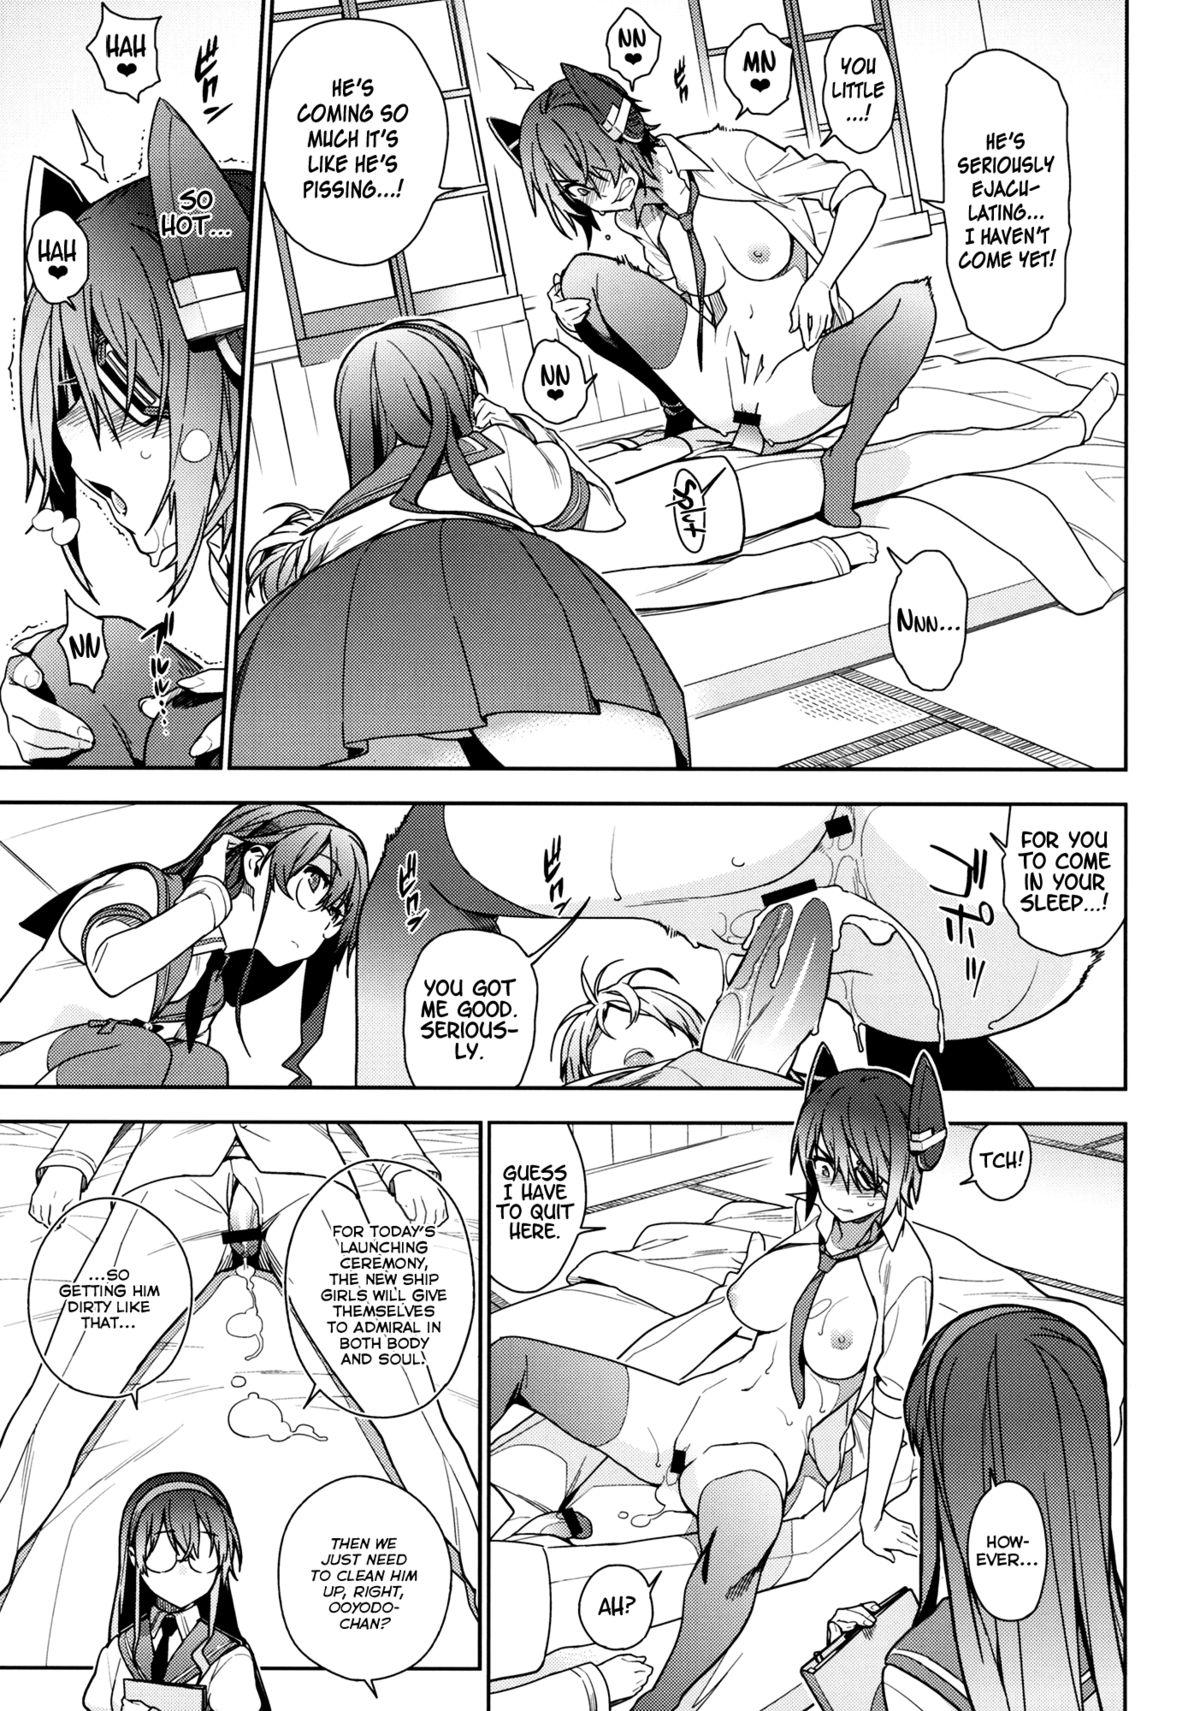 Grande THE LAST ORDER - Kantai collection Teenage Sex - Page 10